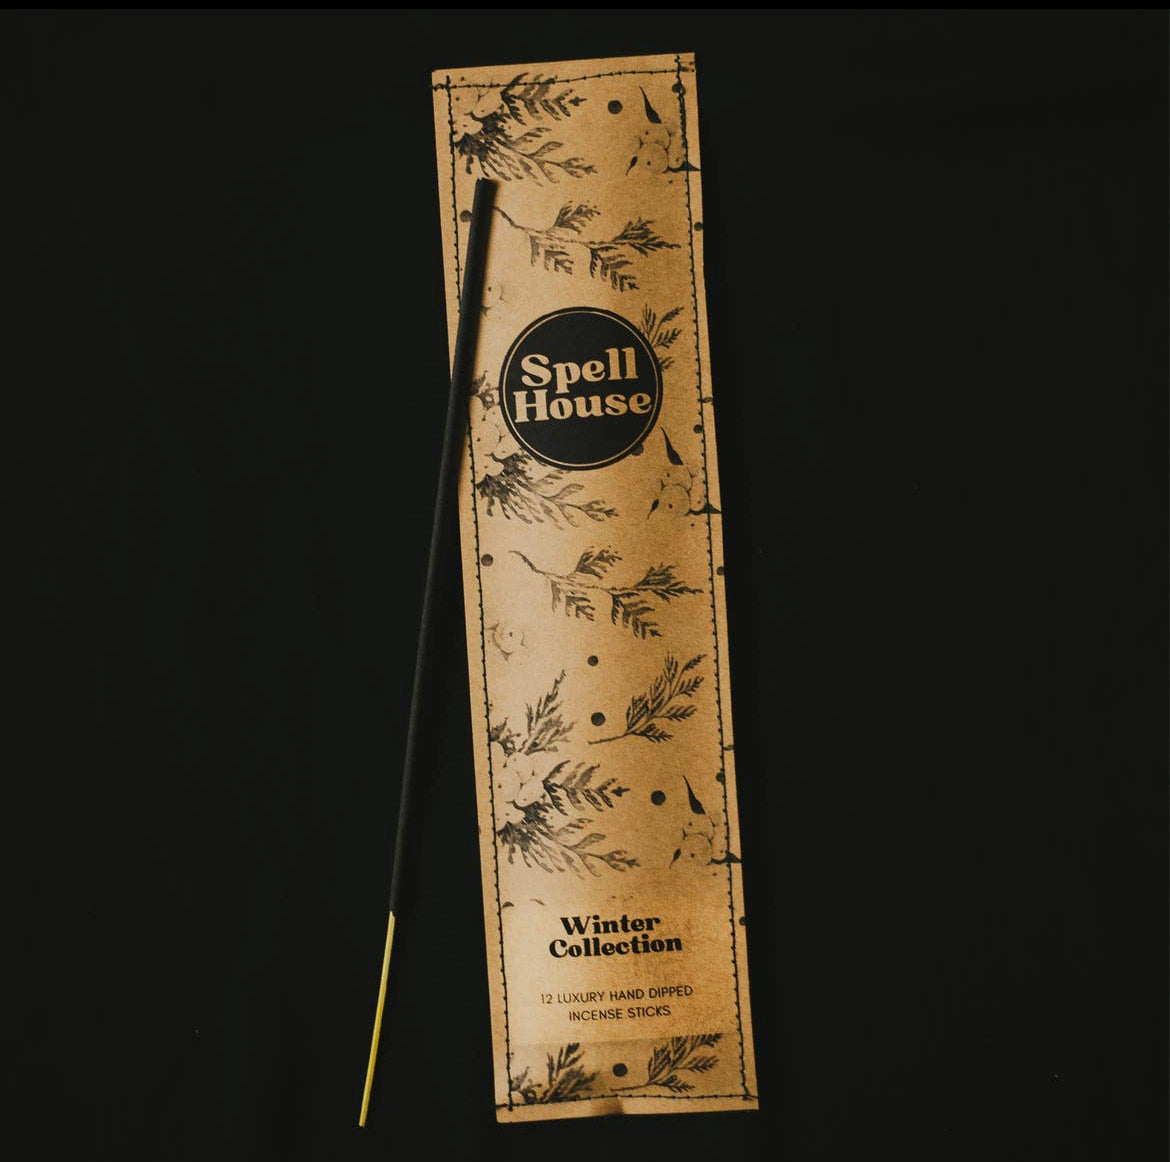 Winter Collection Sample Pack Incense Sticks- Spell House